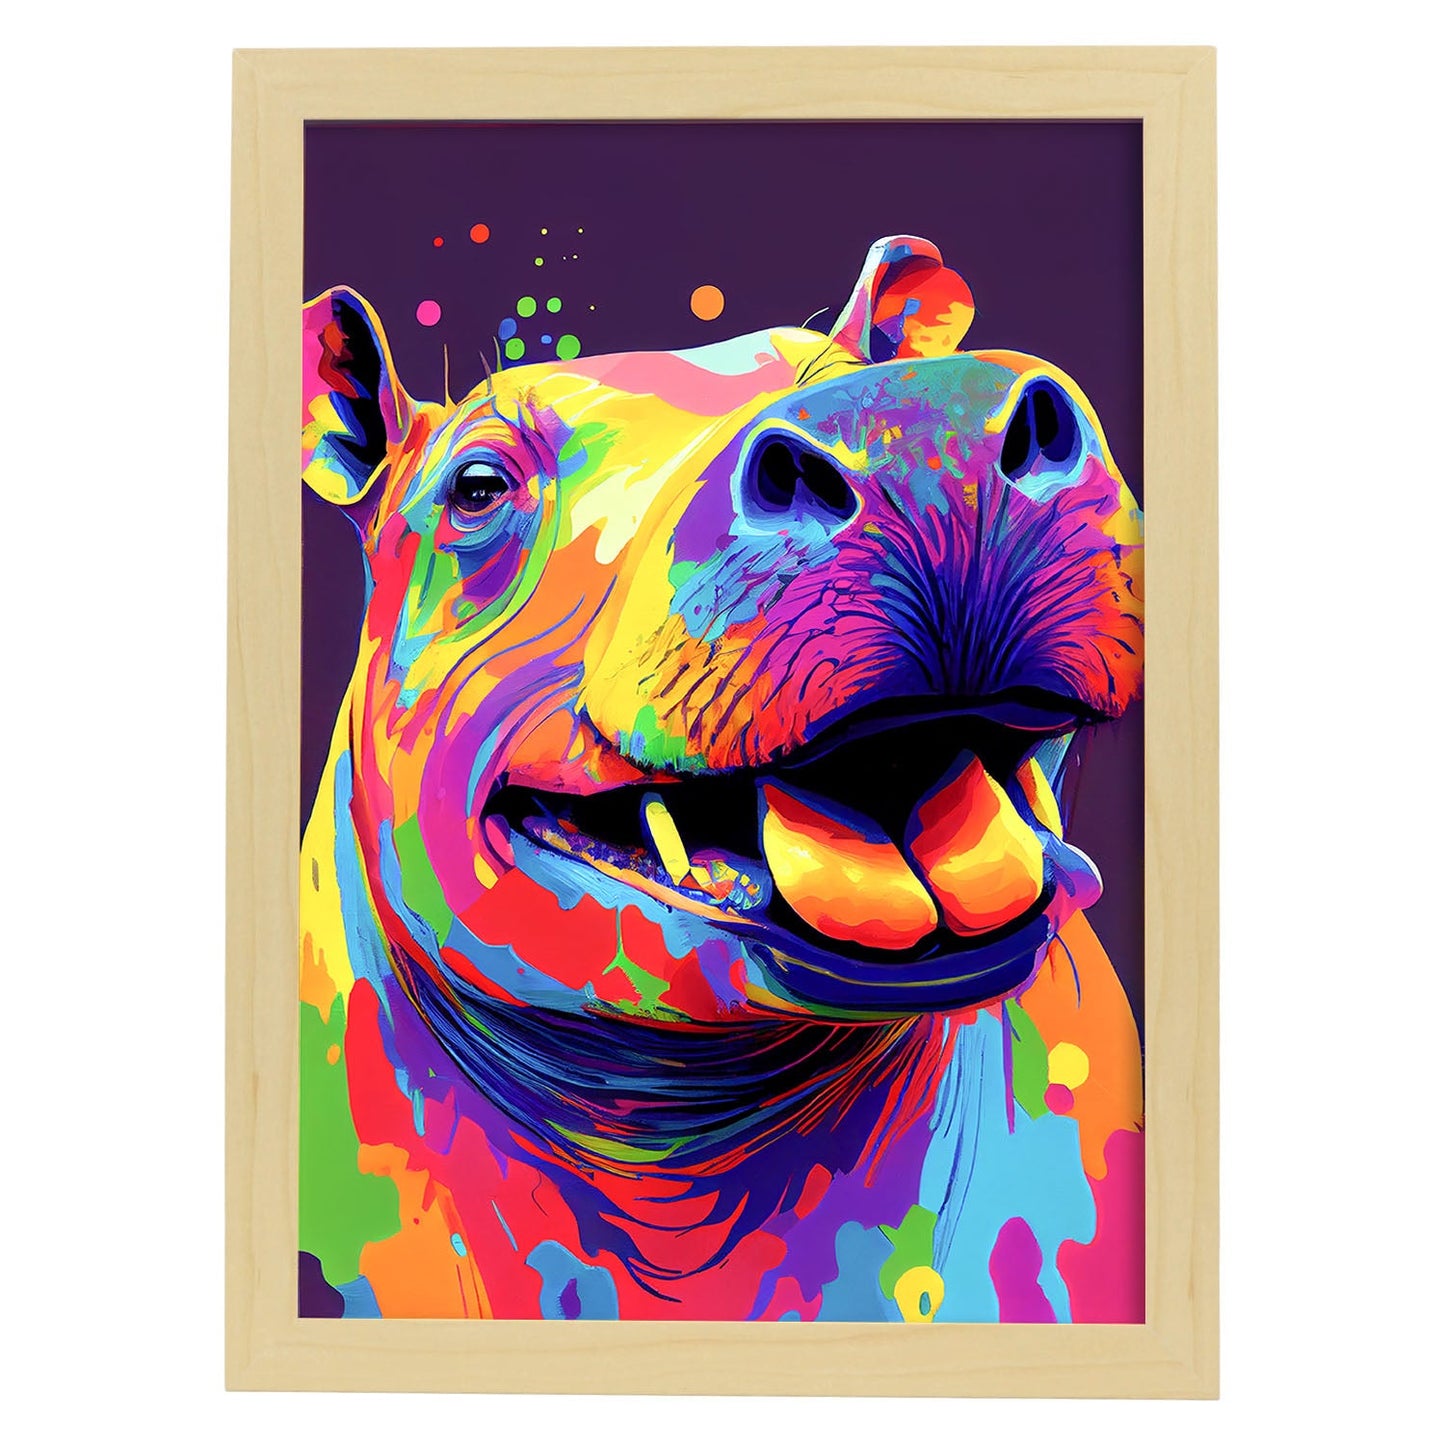 Nacnic Abstract smiling Hippopotamus in Lisa Fran Style_2. Aesthetic Wall Art Prints for Bedroom or Living Room Design.